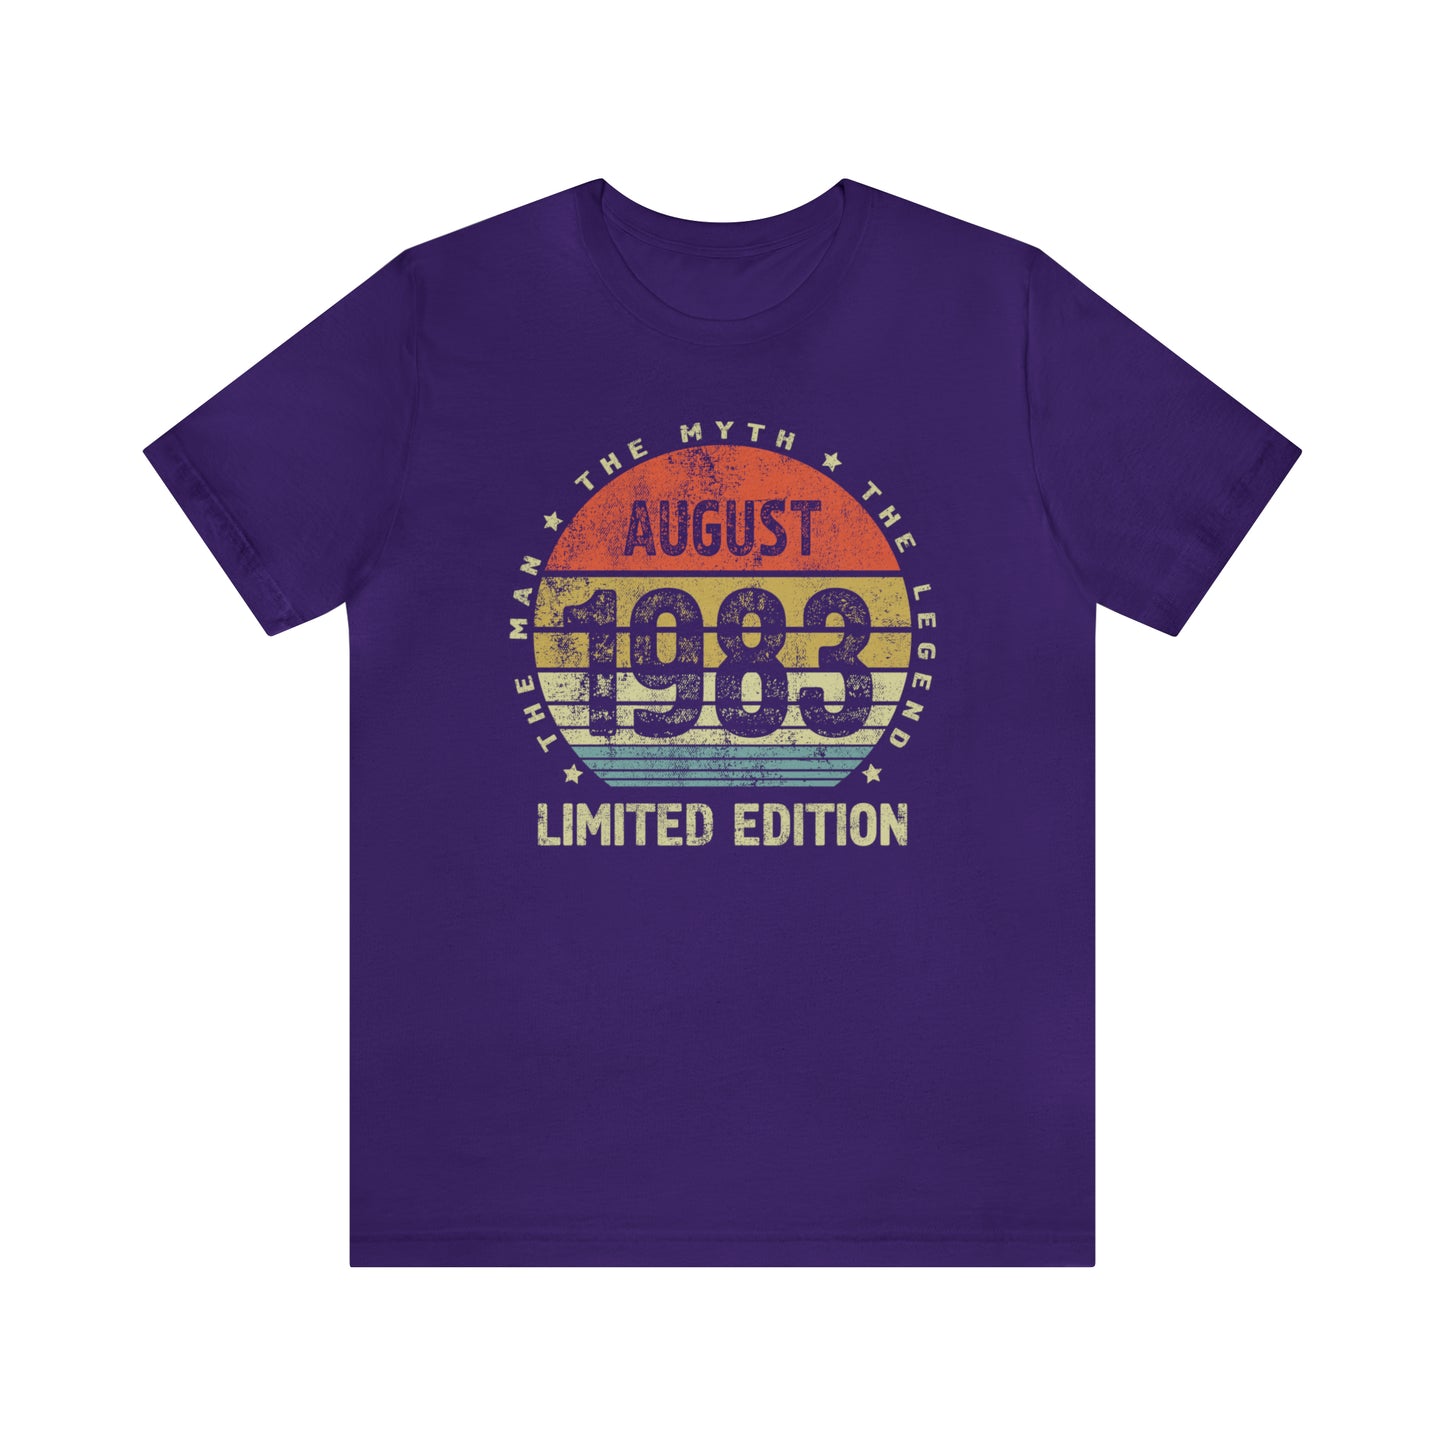 August 1983 birthday Shirt for men or husband, Gift shirt for him or brother, The Man the Myth The Legend